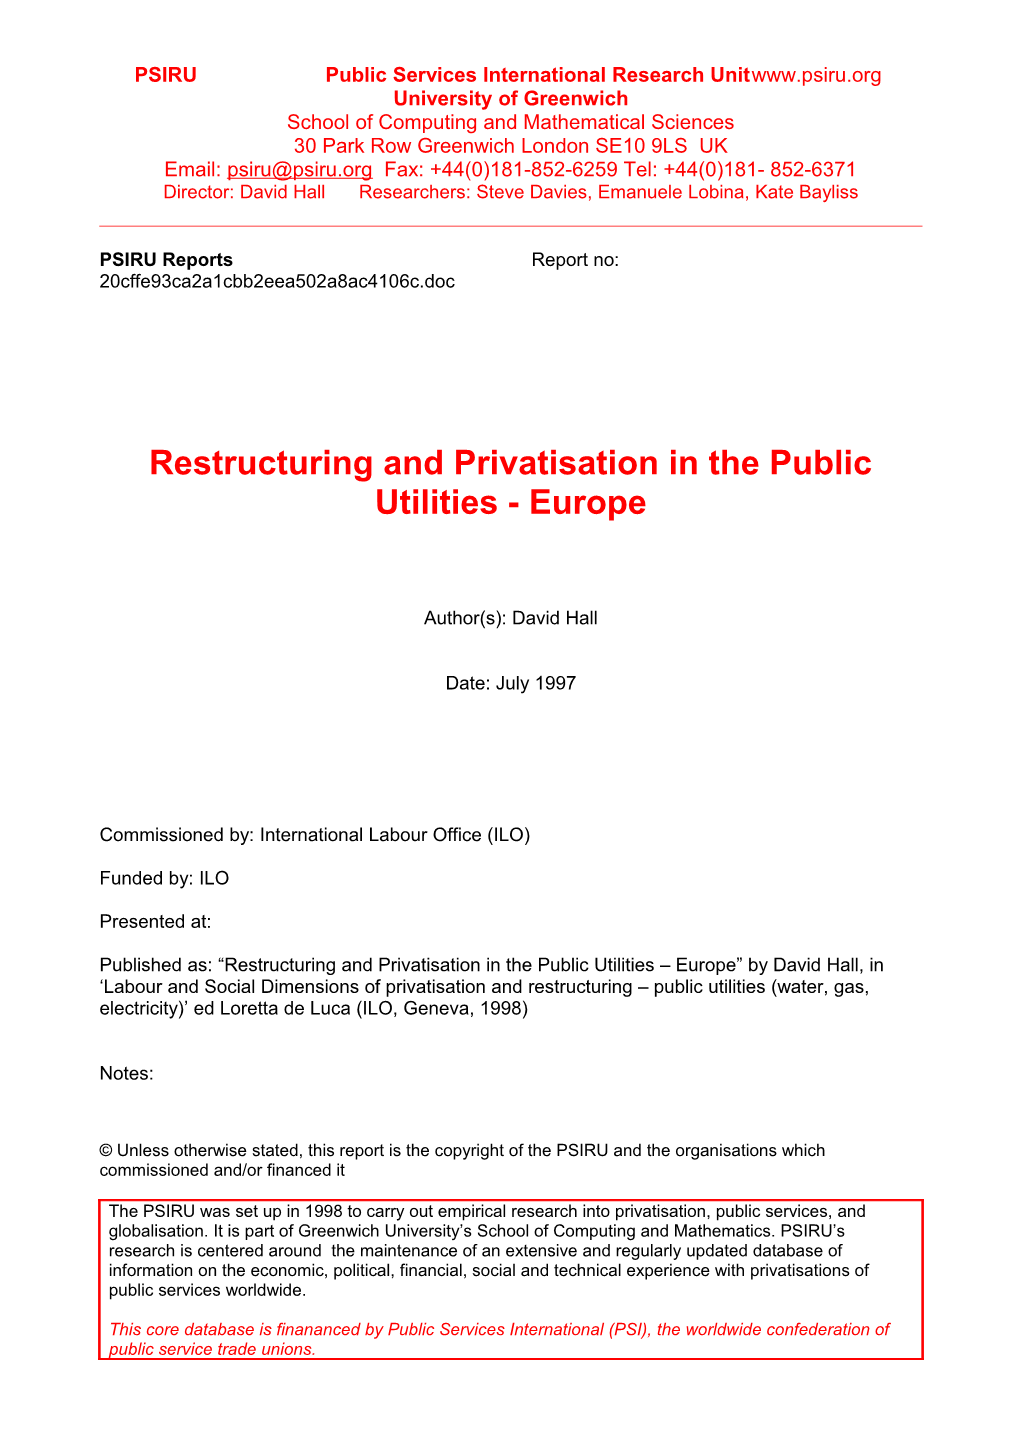 Restructuring and Privatisation in the Public Utilities - Europe